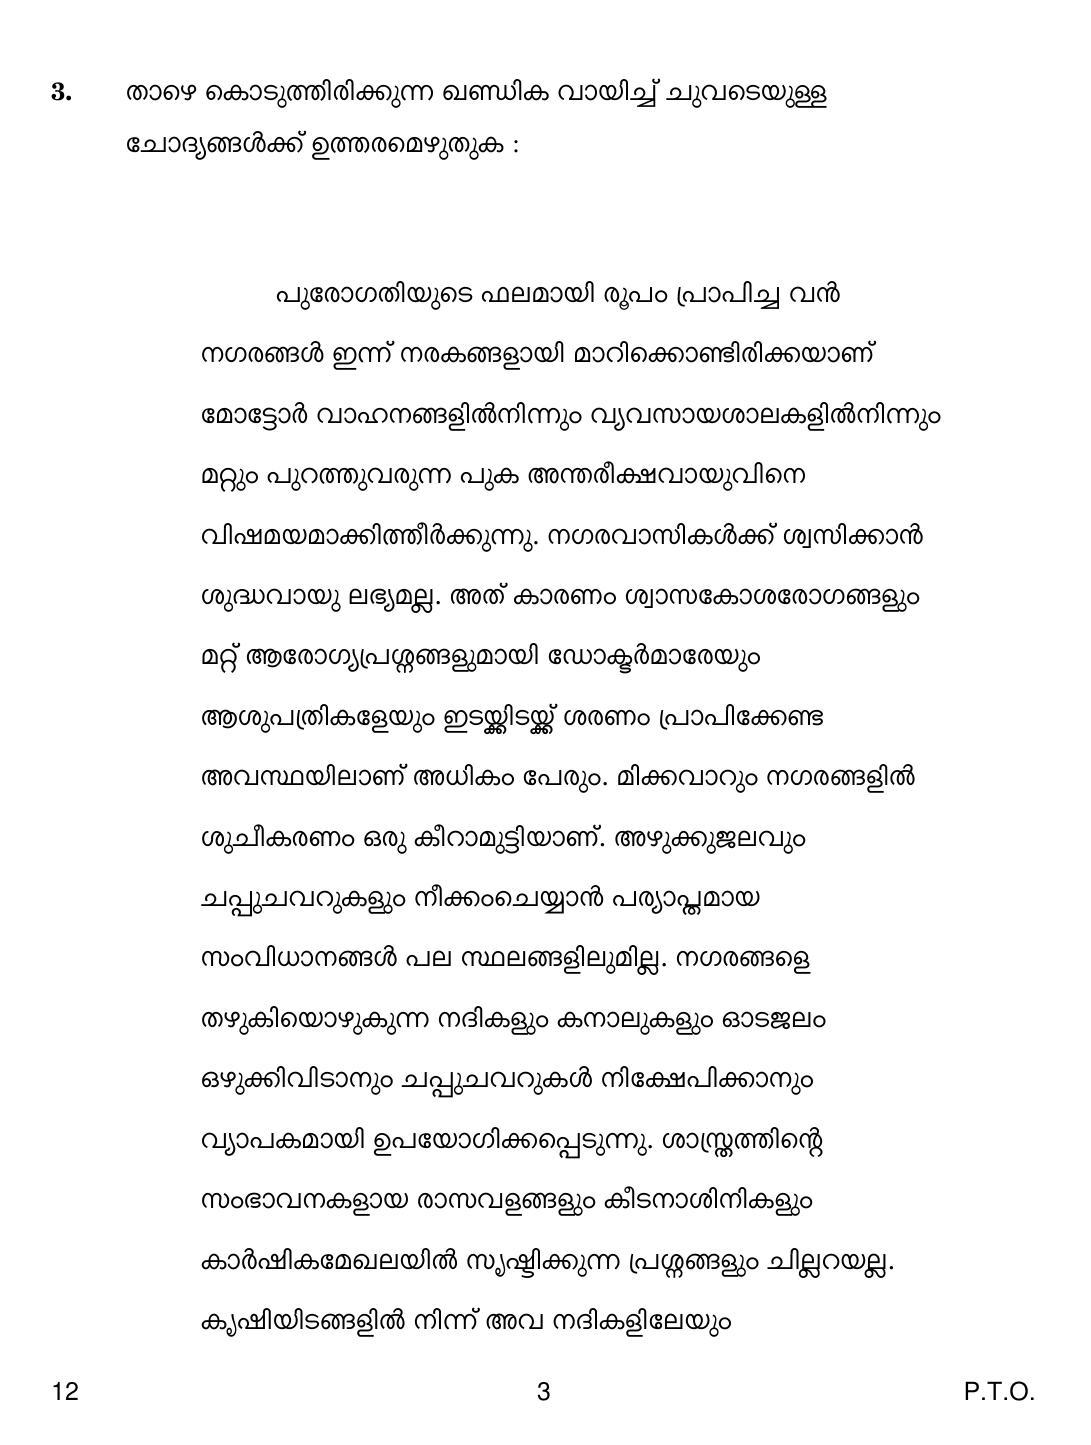 CBSE Class 12 12 Malayalam 2019 Compartment Question Paper - Page 3